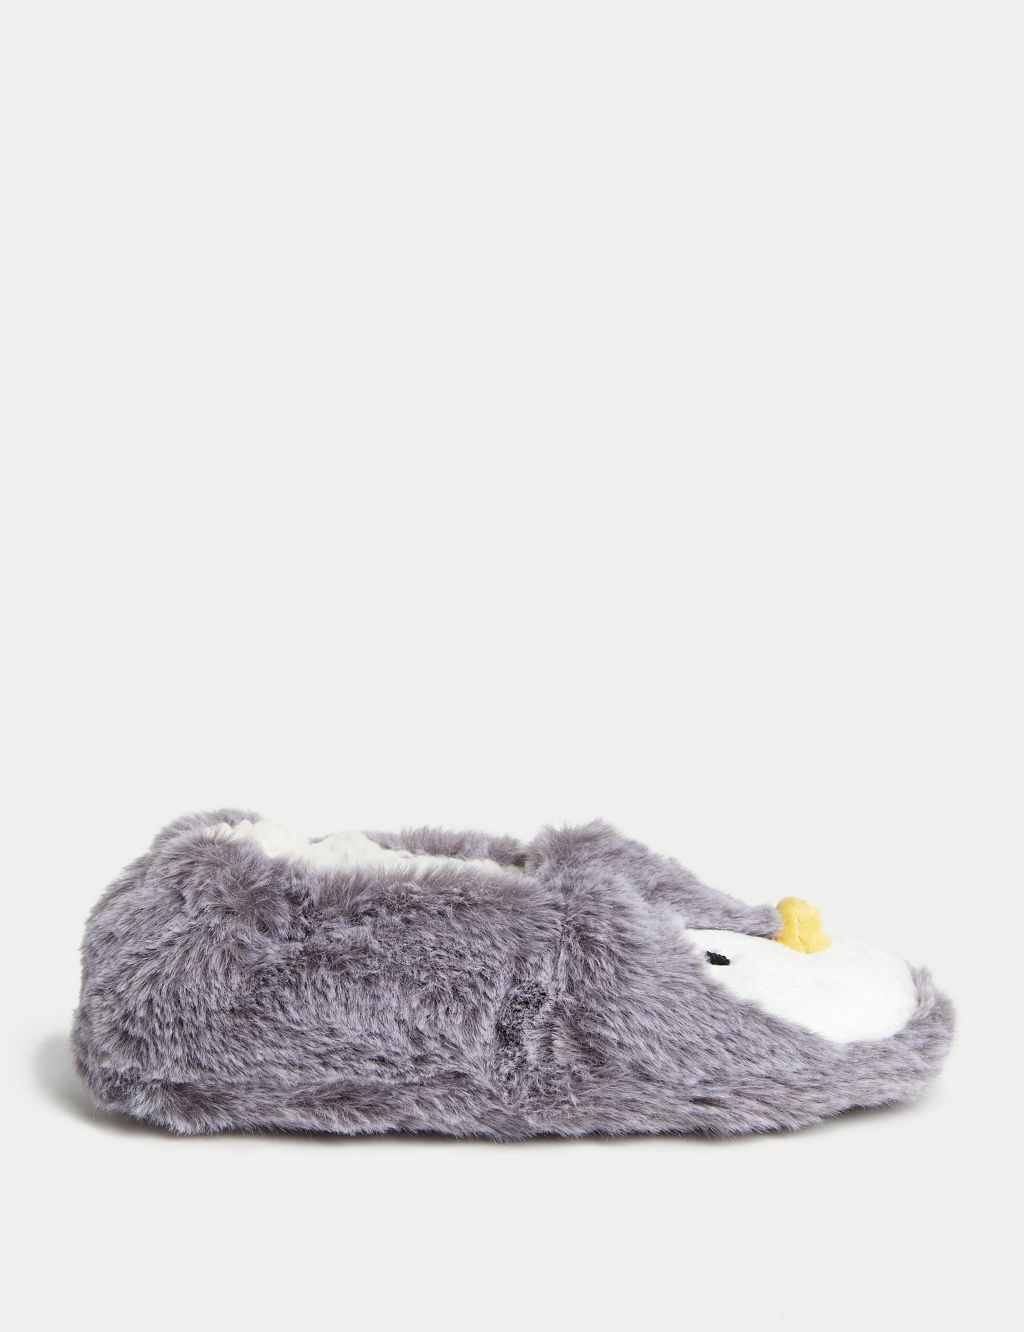 Kids' Faux Fur Penguin Slippers (4 Small - 6 Large) image 1